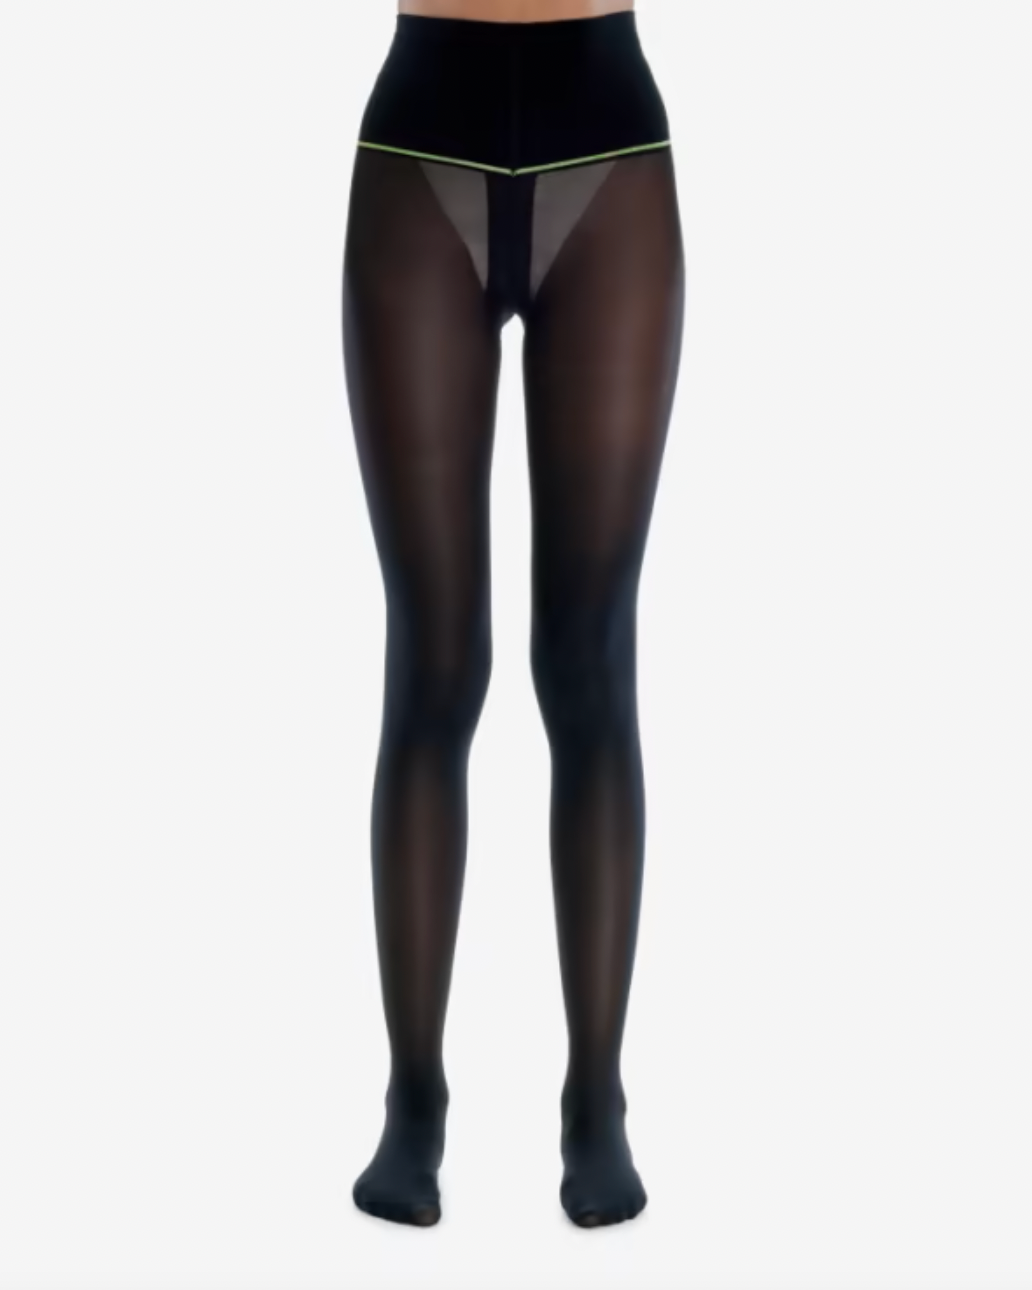 Sheer Tights with 10 Denier Material and Sheer To Waist Design